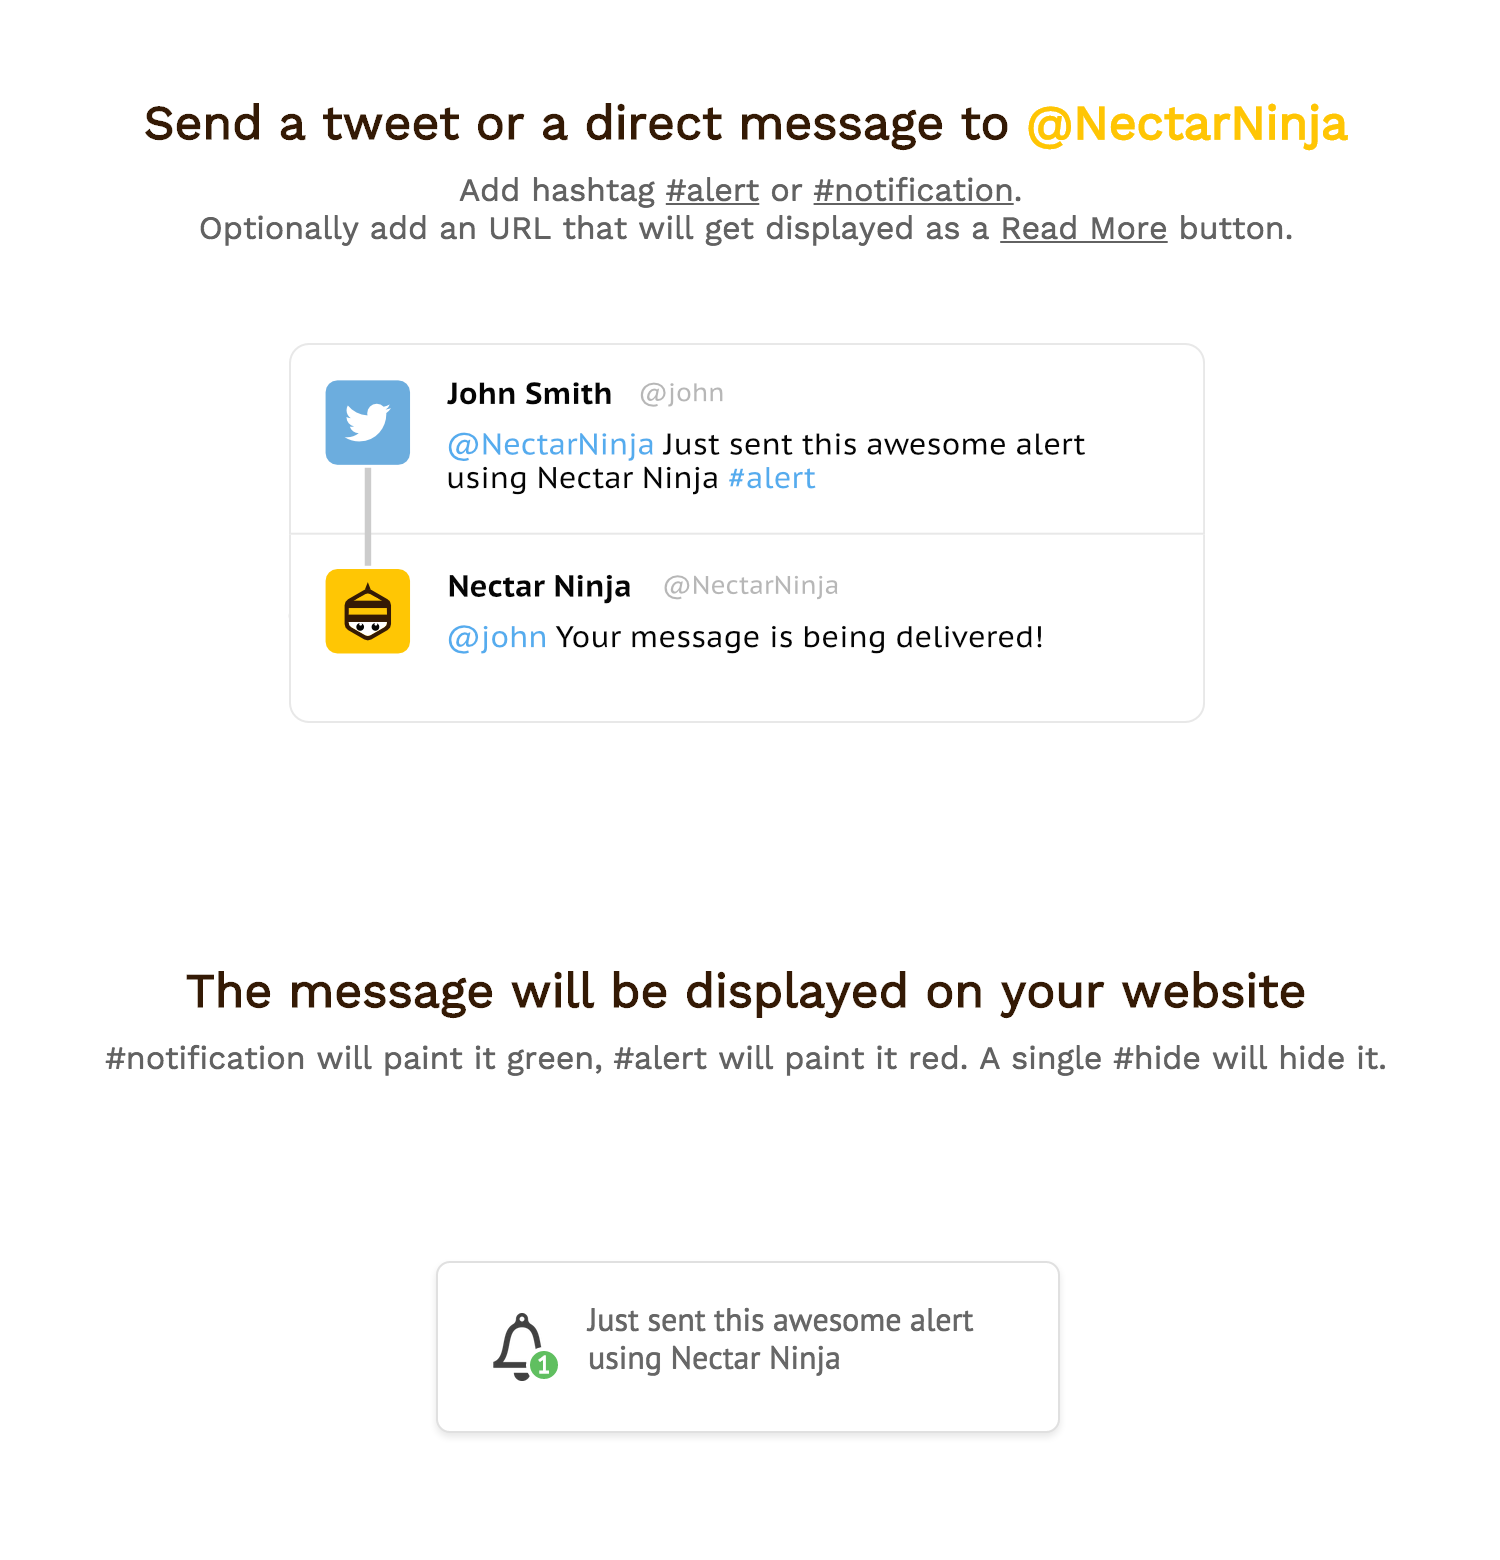 Nectar Ninja allows you to show messages on your site just by sending a tweet!